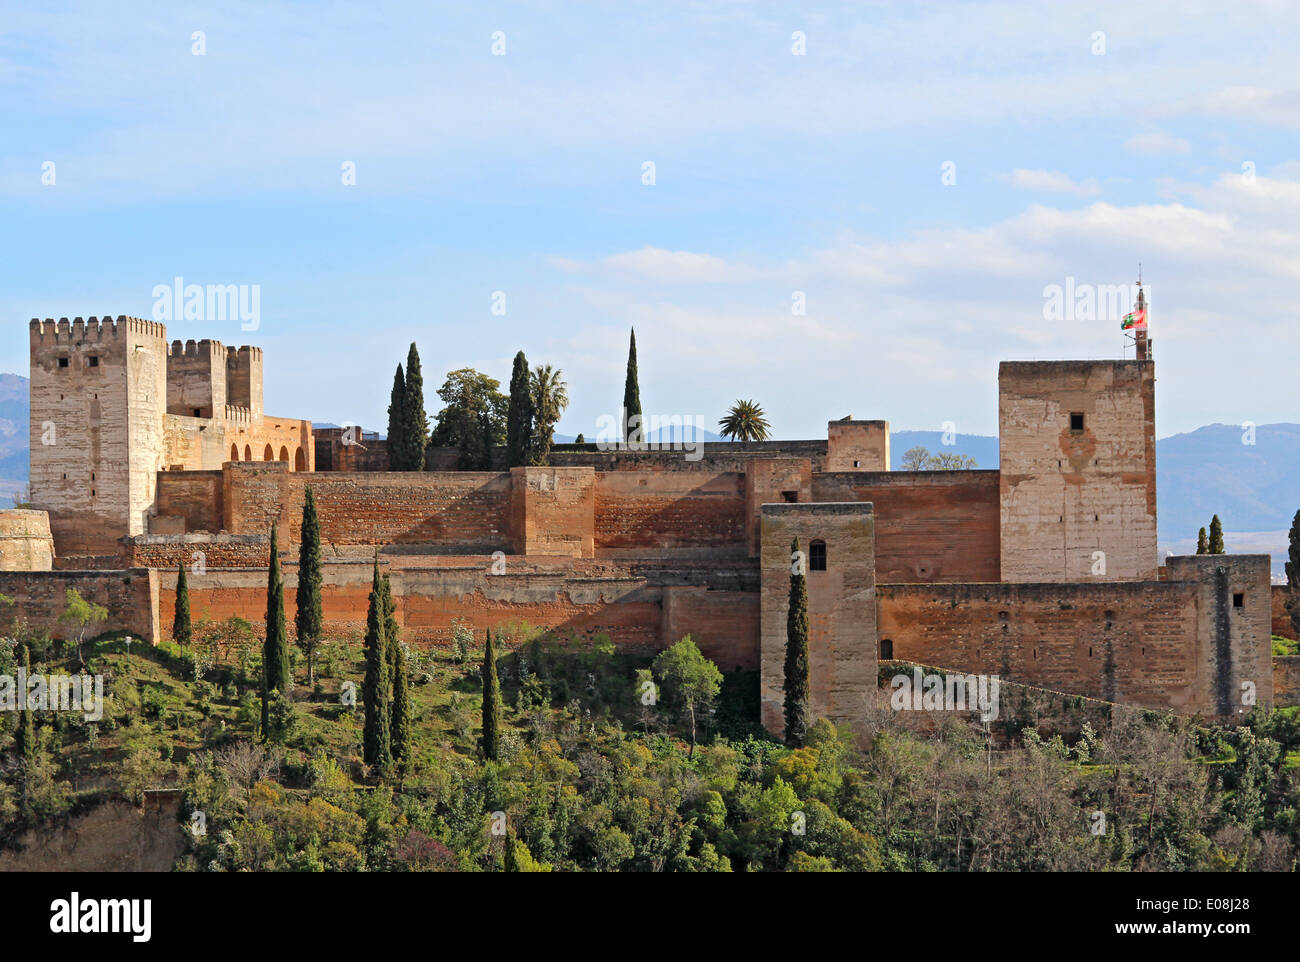 The Alcazaba fortifications of the Alhambra against the blue skies of Granada, Spain Stock Photo